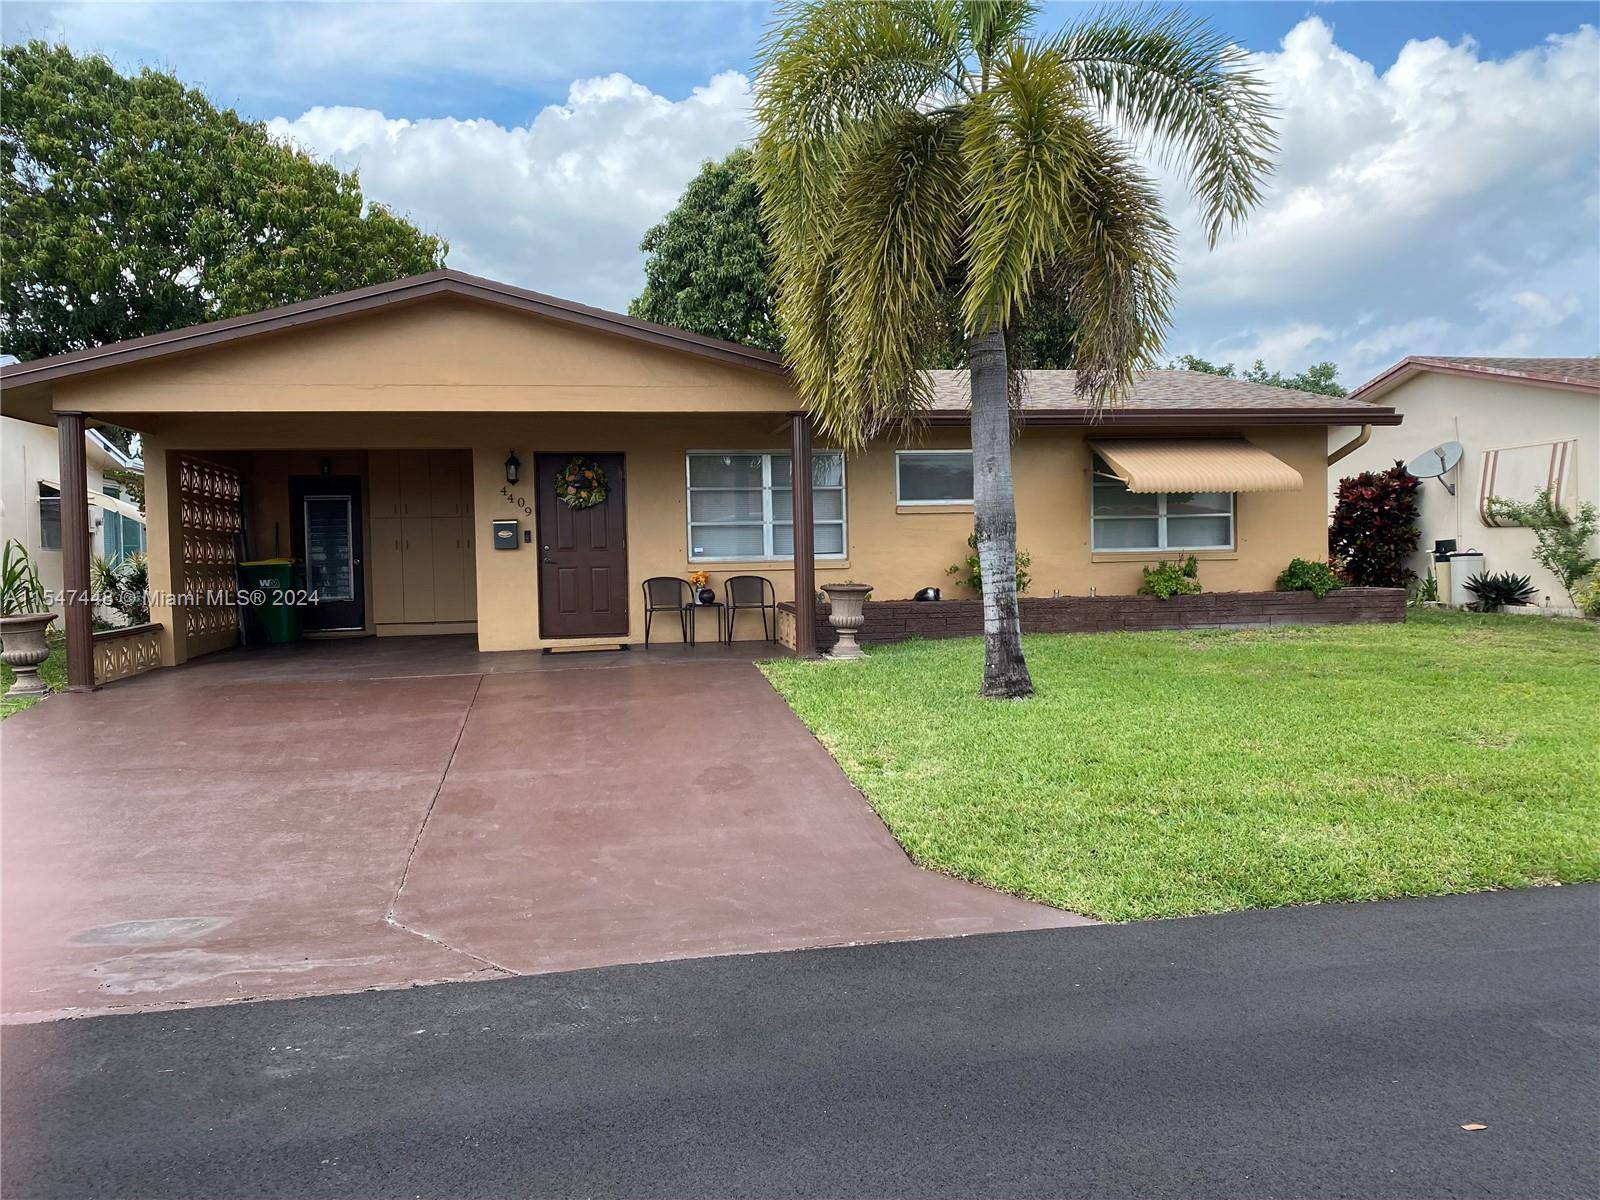 Welcome to your dream home in the desirable 55 community of Tamarac.